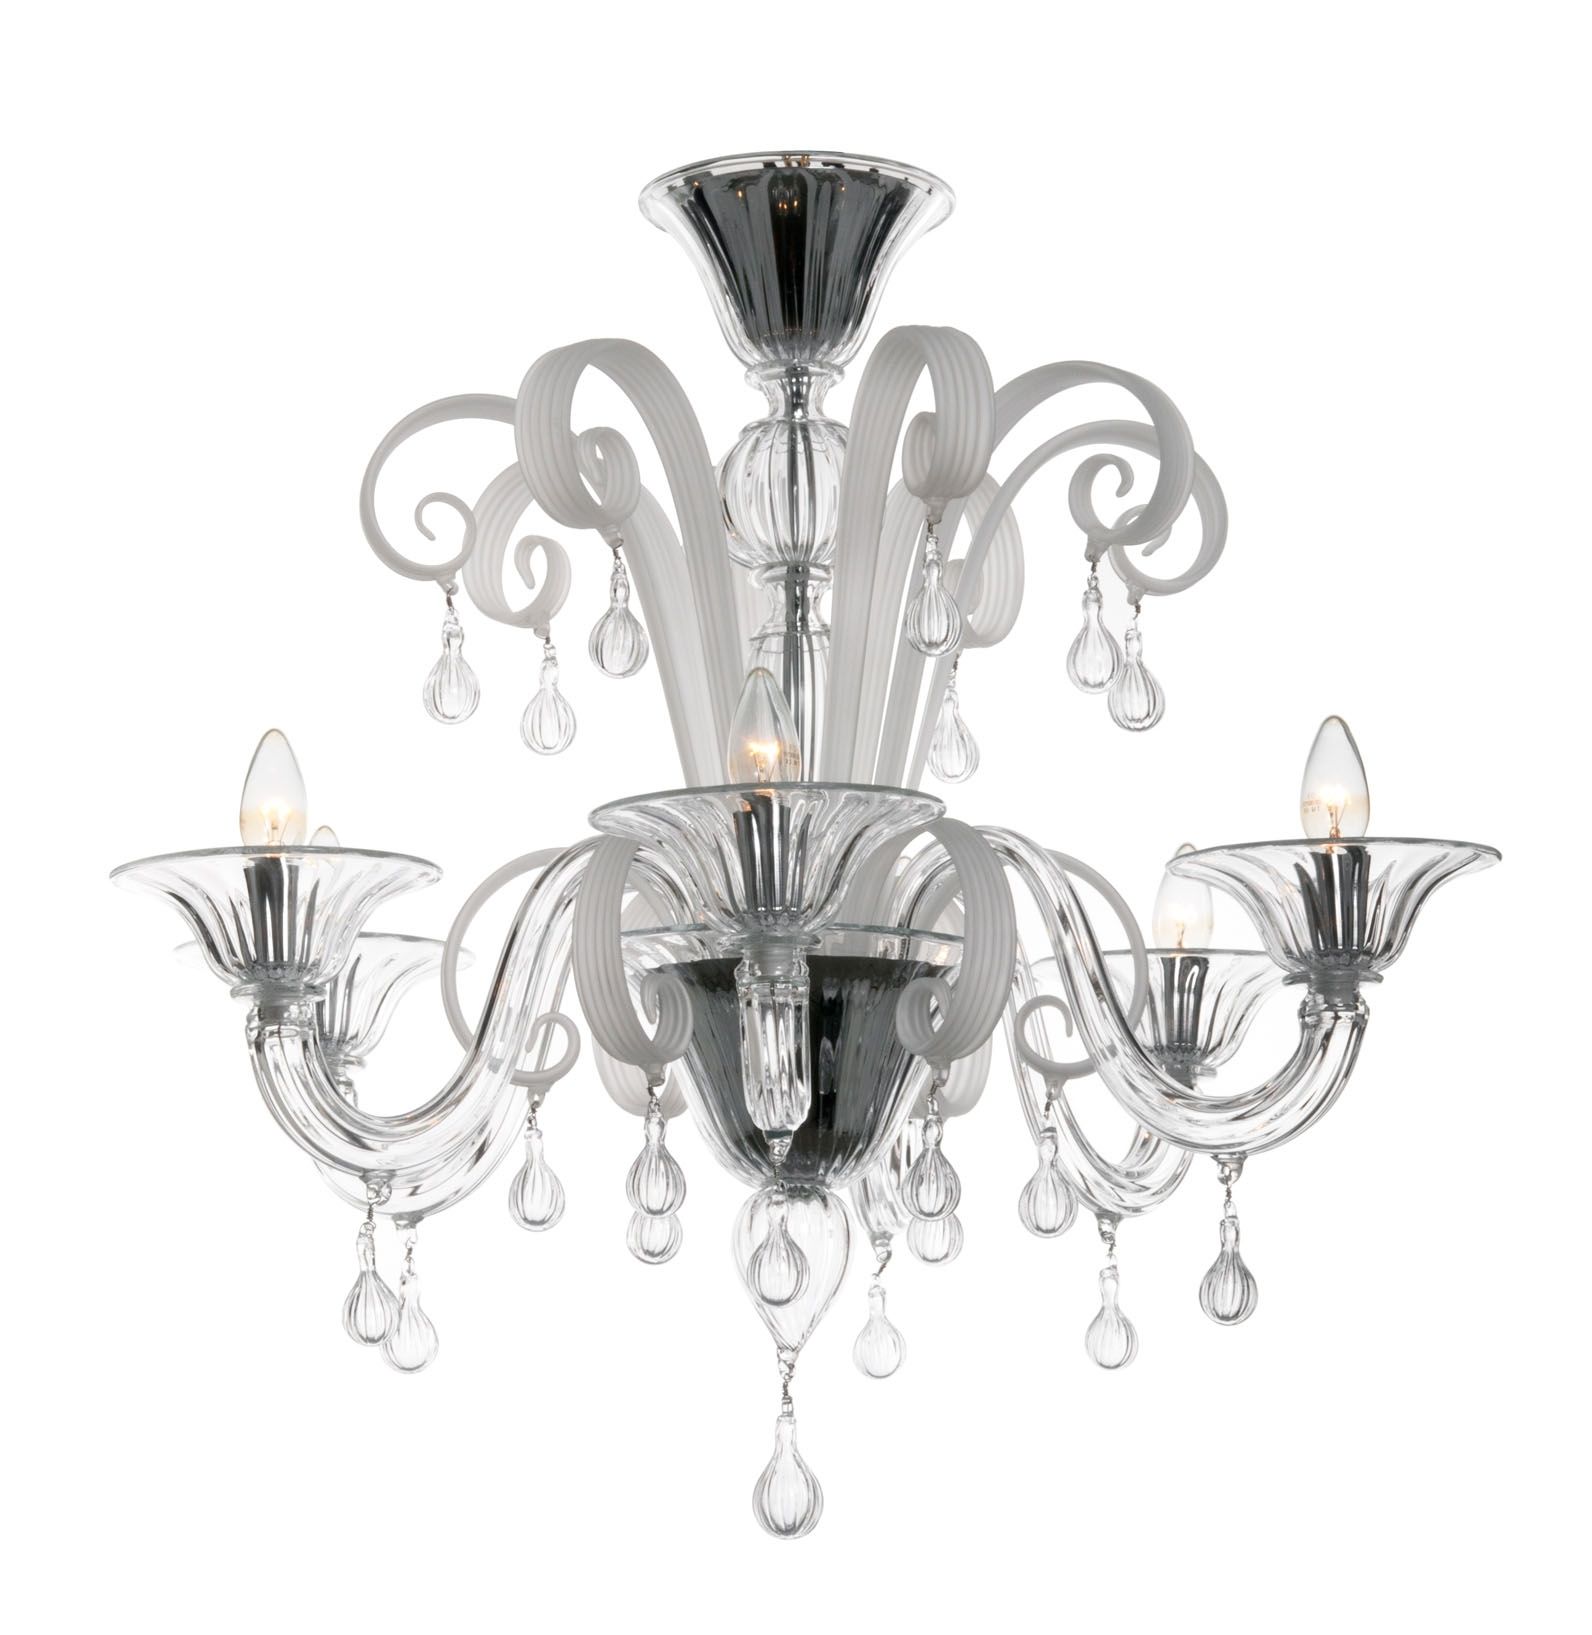 Glass Chandelier : Home Decoration Lighting Font B Rectangular B Throughout Famous Black Glass Chandeliers (View 14 of 20)